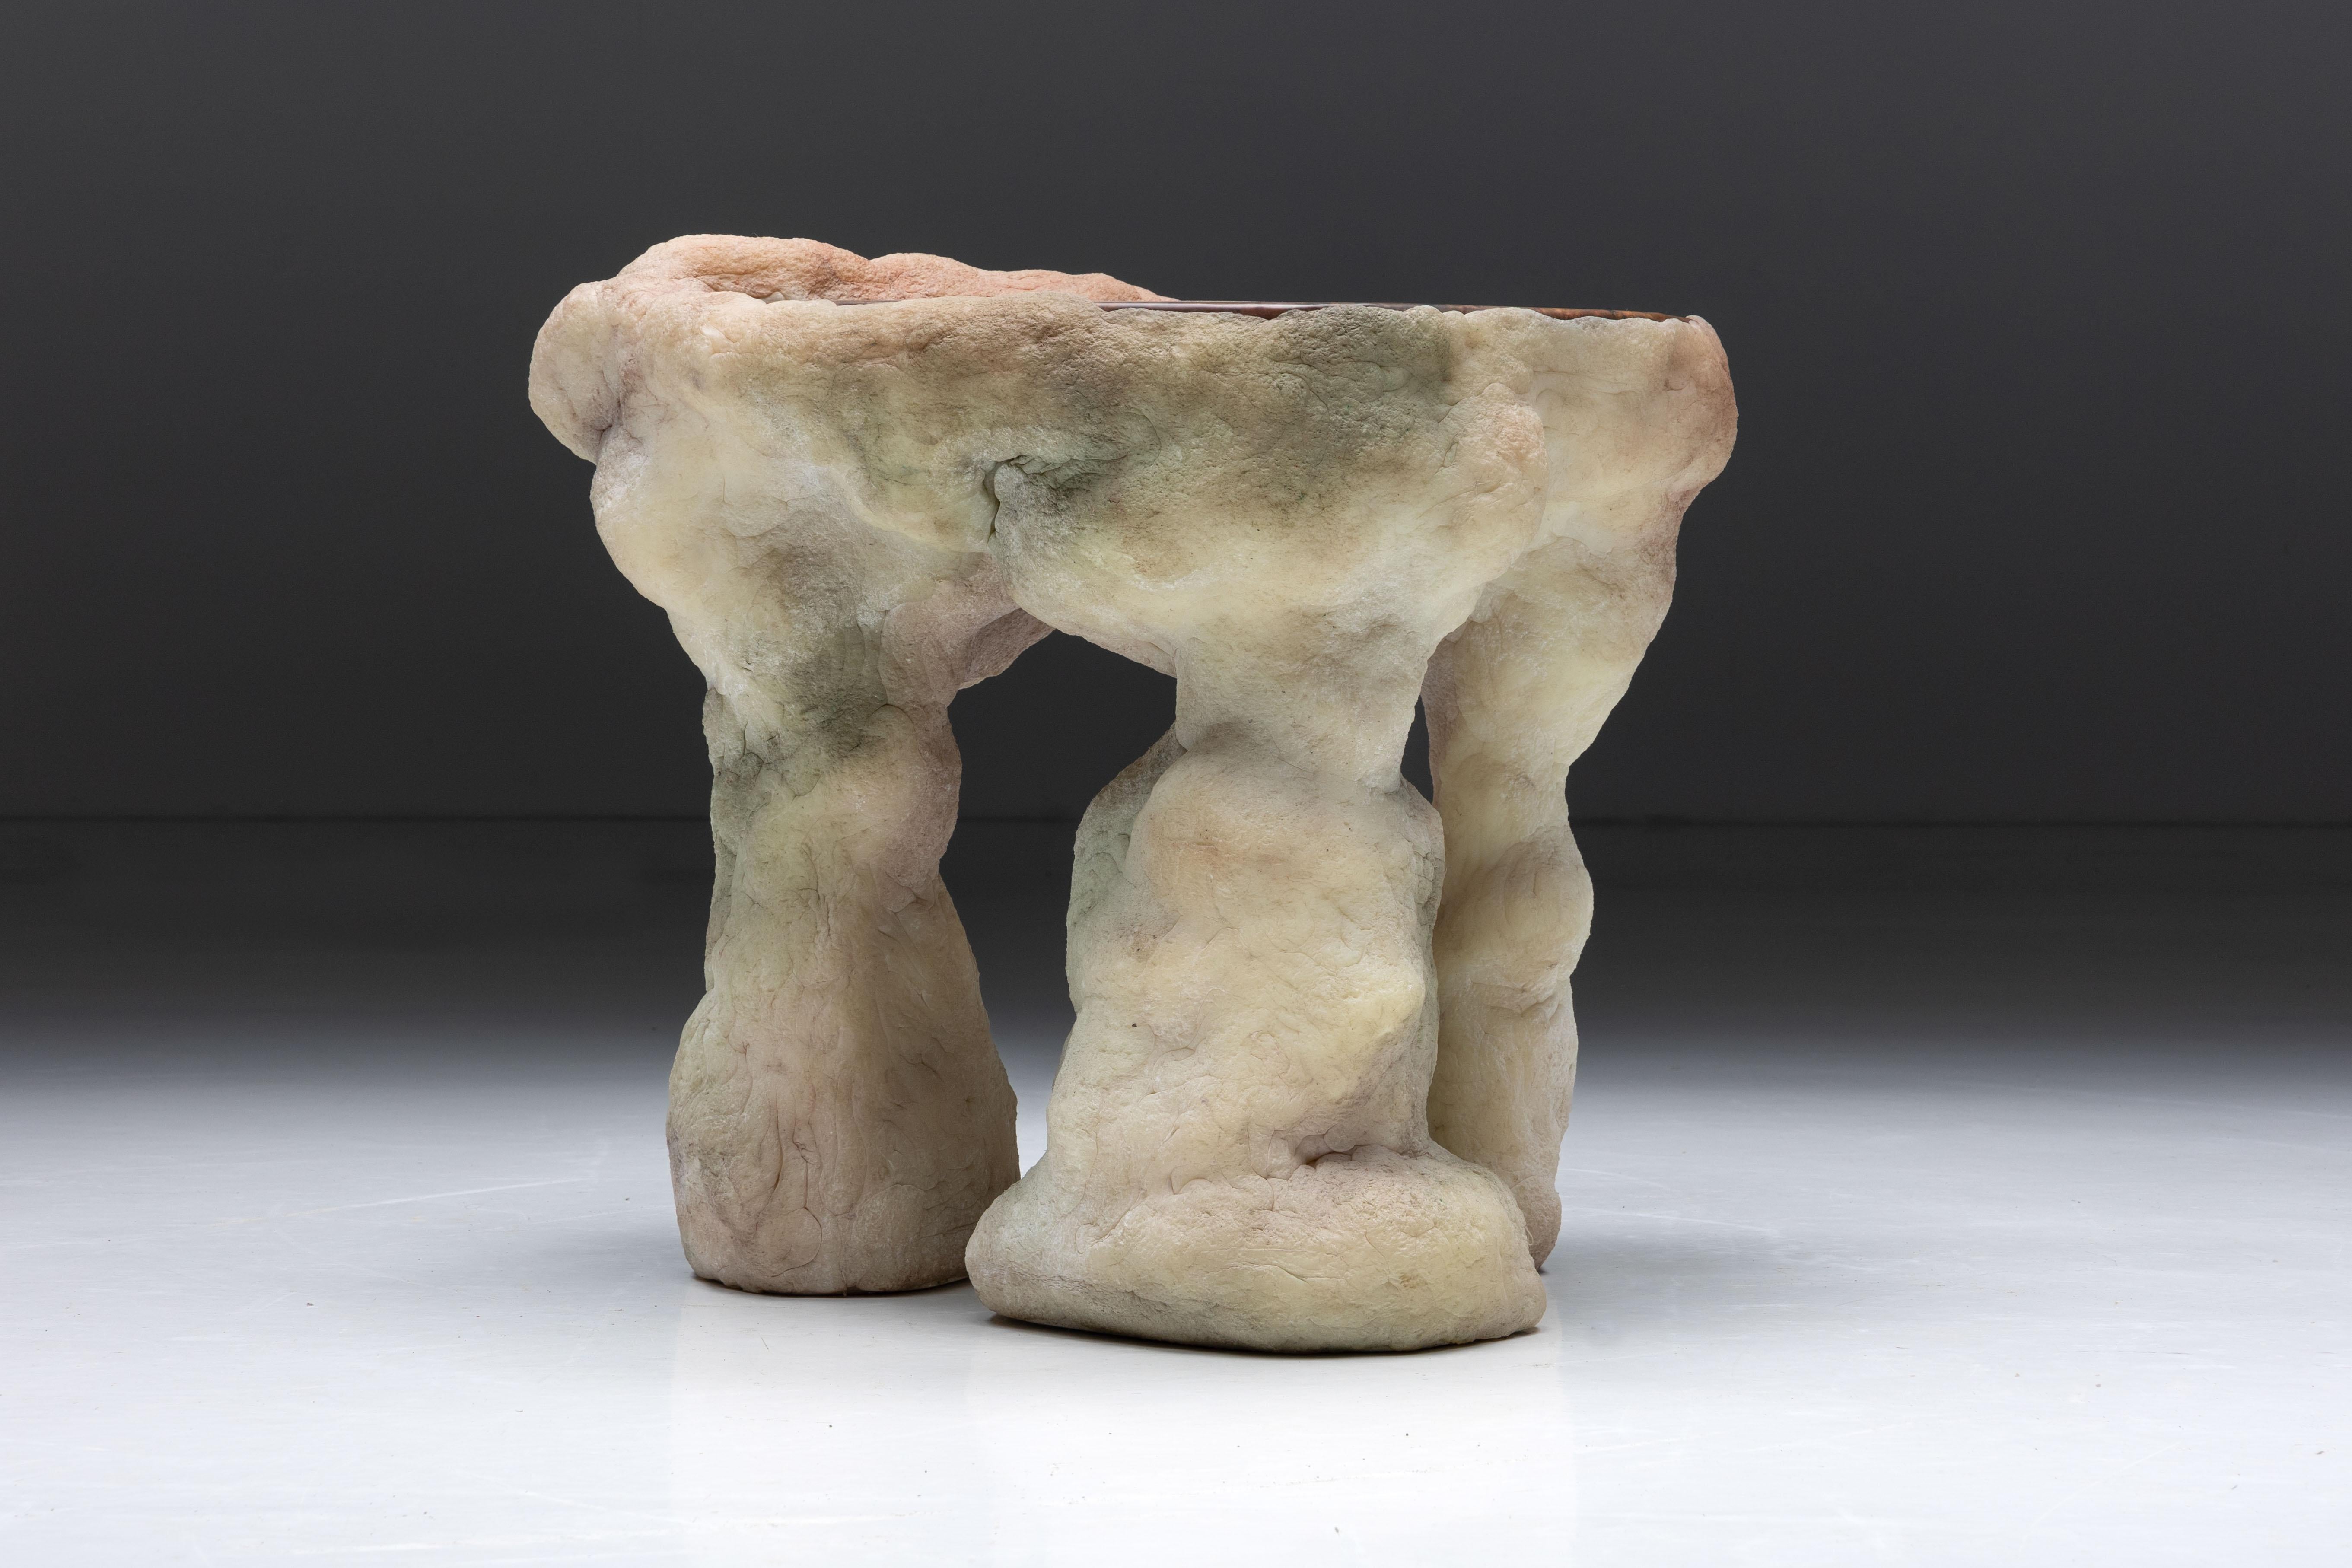 Elissa Lacoste's 'I Dream of Megalithic Times' series: Side Table, 2020. Composed of various speleothem-like shapes emerging from silicone skins infused with earthly pigments. This collection of functional art pieces challenges conventional notions